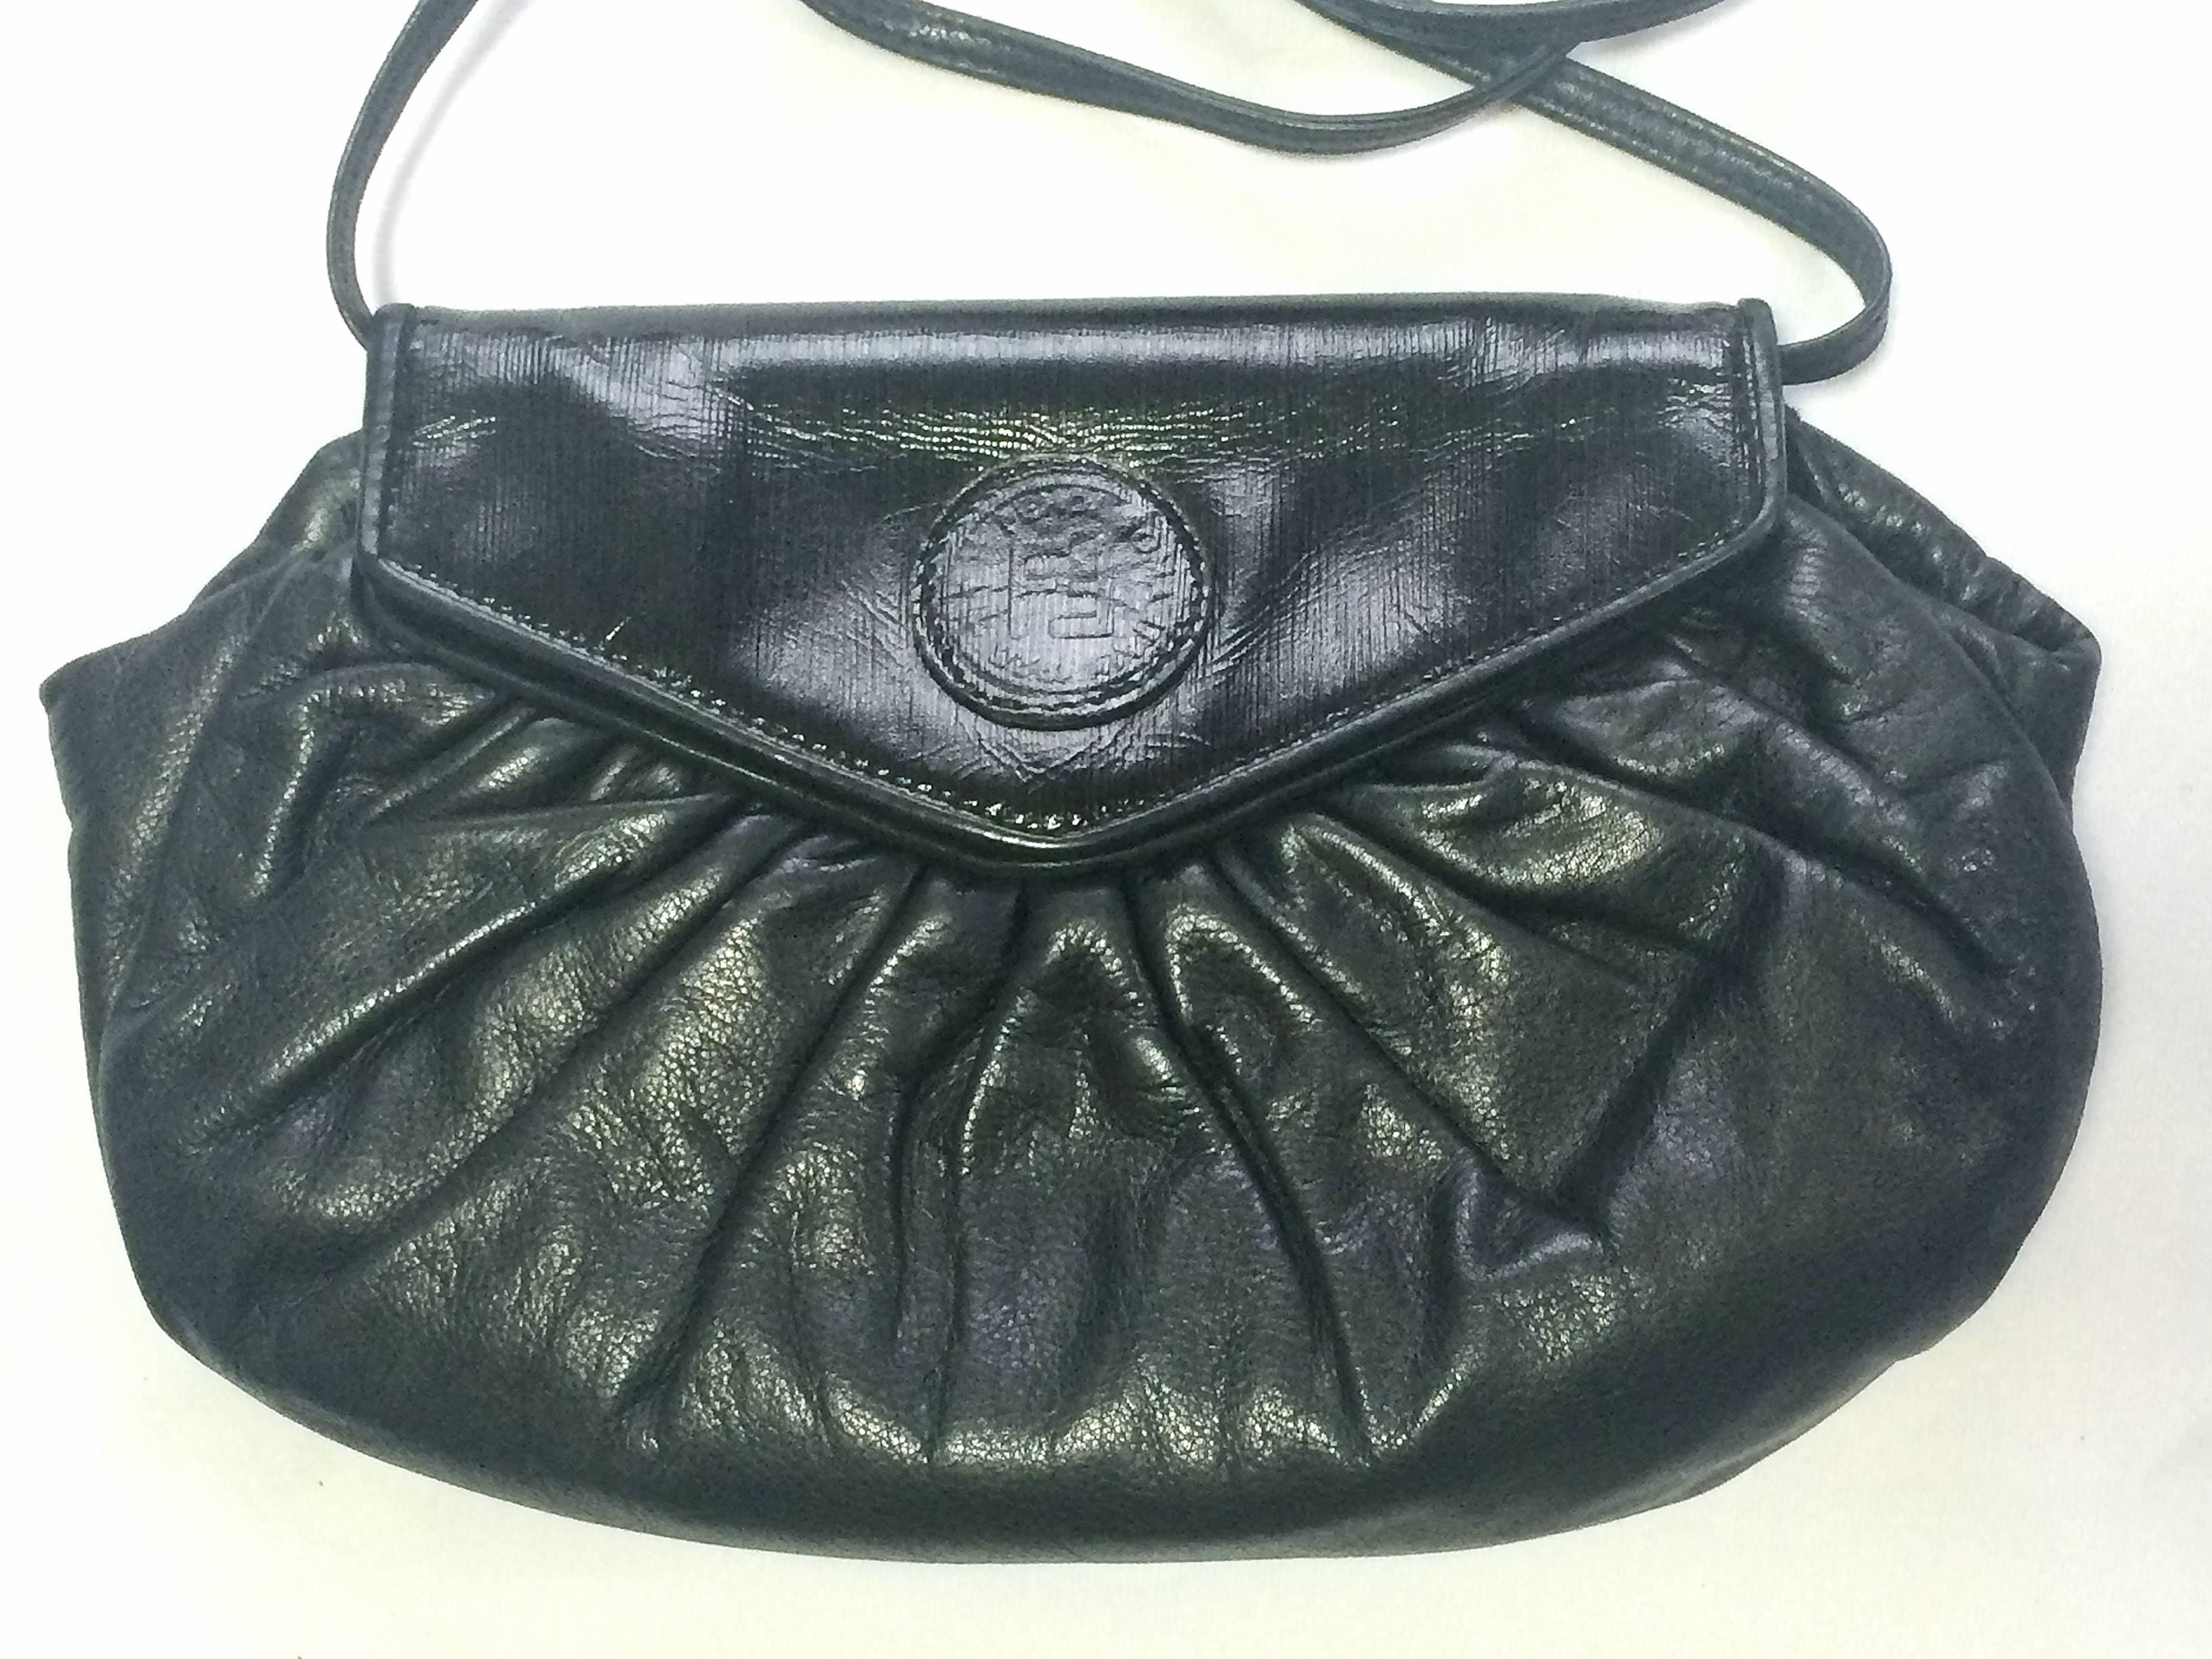 1980s. vintage FENDI black nappa leather oval round shape shoulder purse. Can be a clutch, pouch bag as well.

For all FENDI vintage lovers, this unique and rare vintage masterpiece is right for you!
Cute form in round shape in black nappa